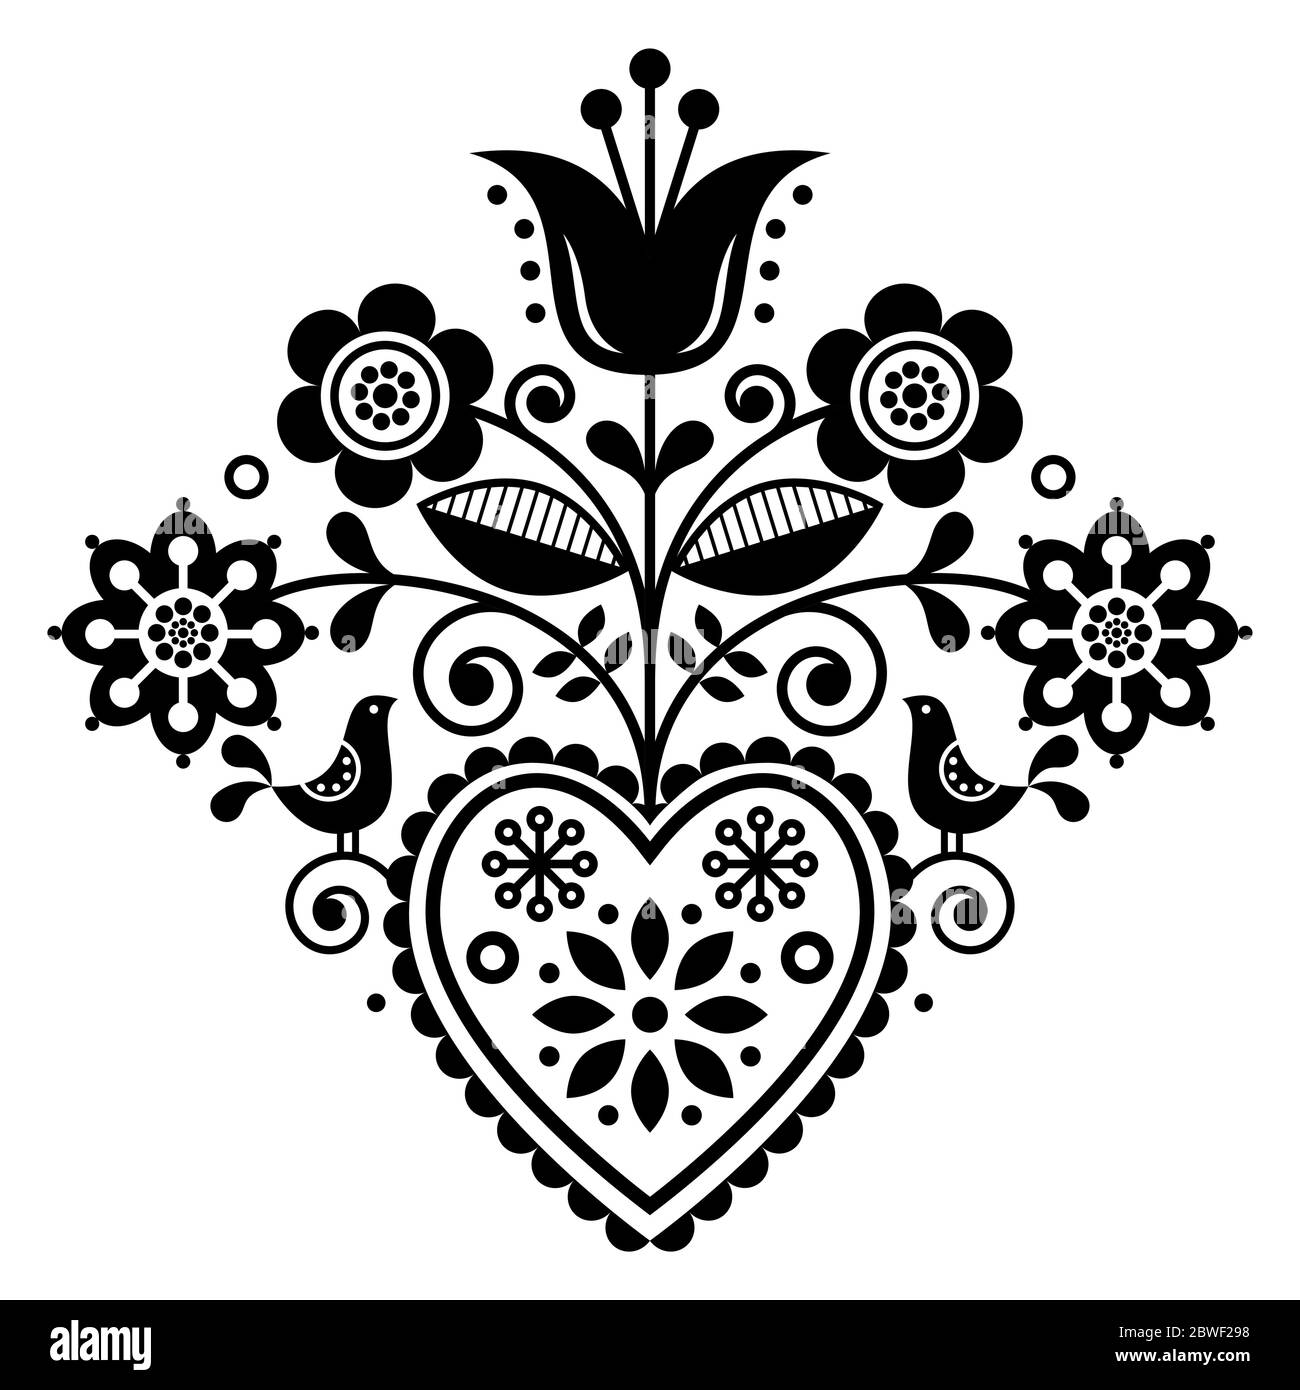 Scandinavian retro folk art floral, vector design in black and white, Nordic pattern with birds and flowers Stock Vector